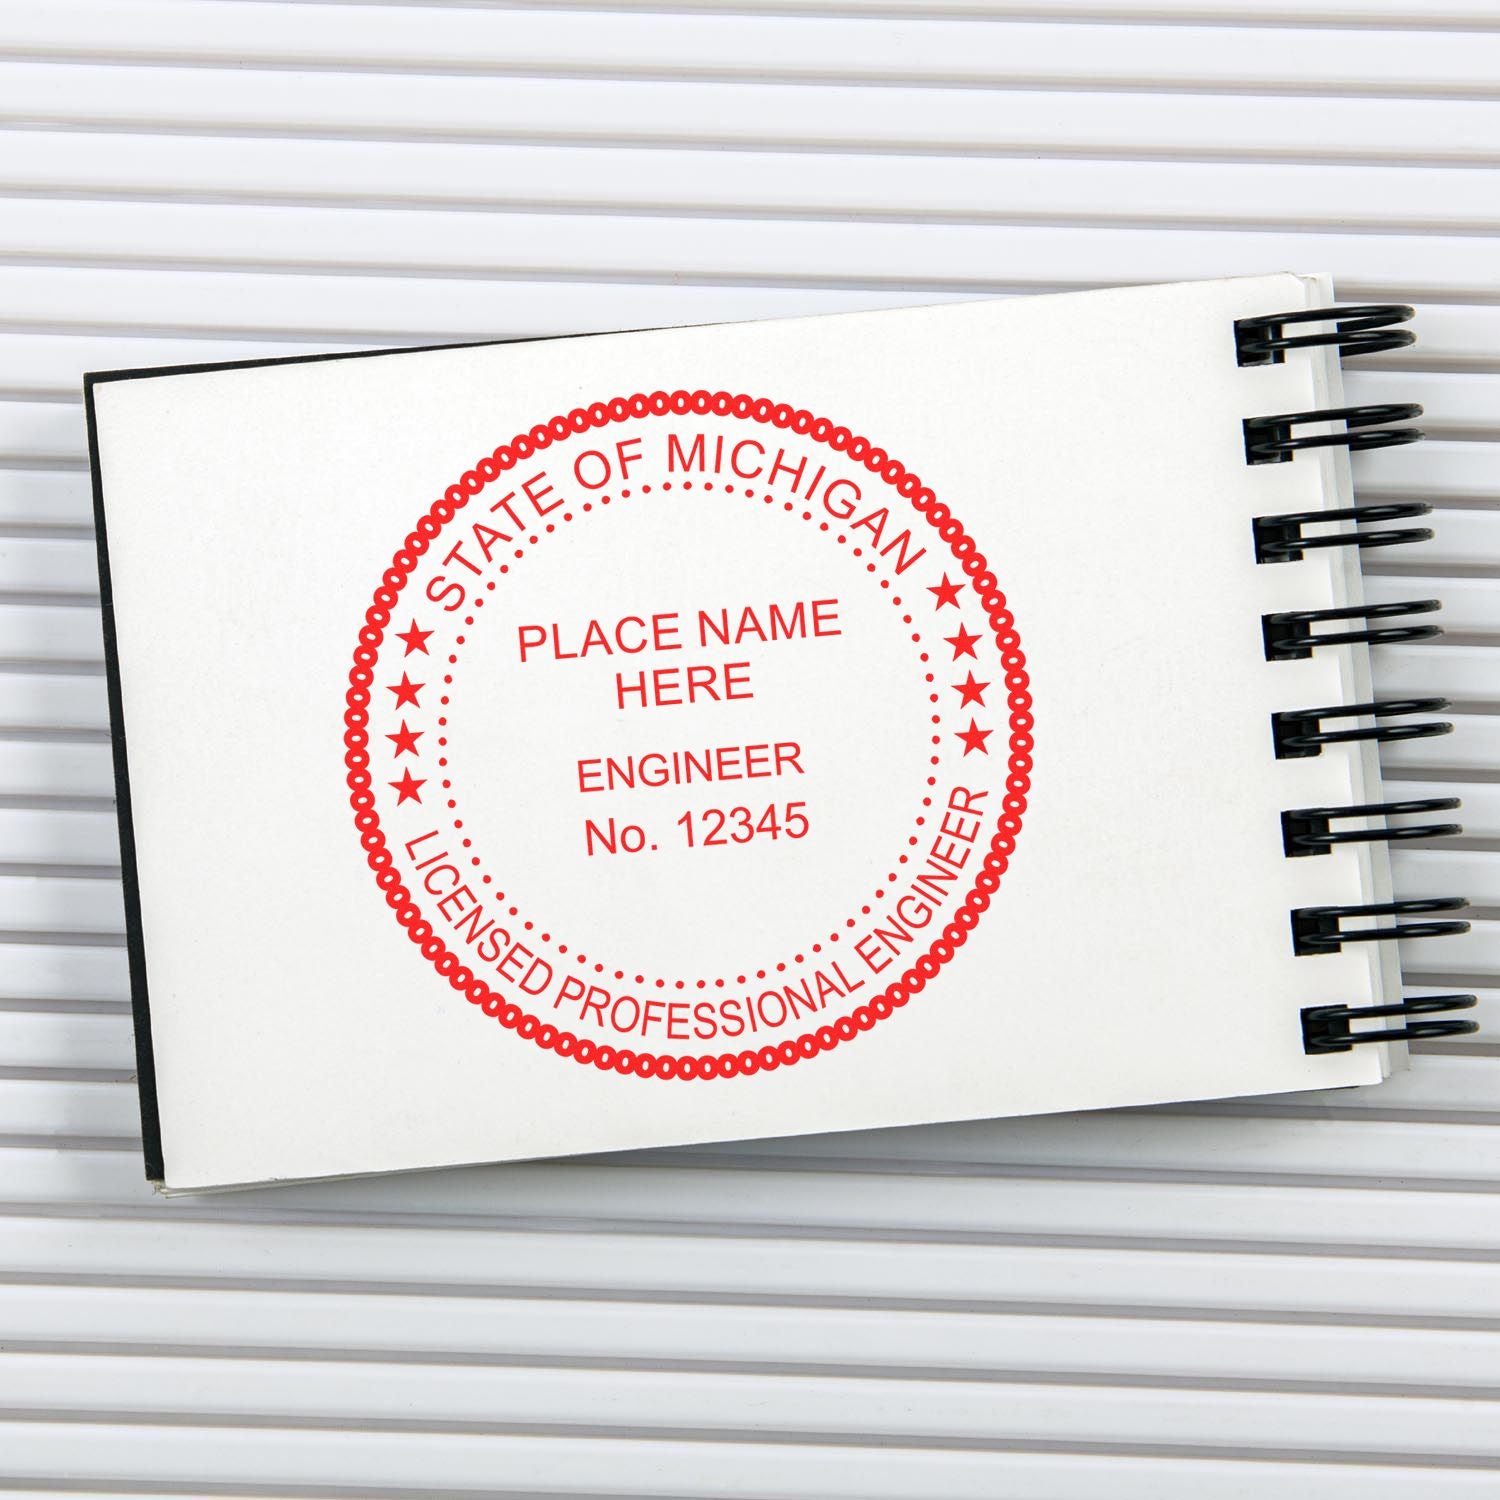 A lifestyle photo showing a stamped image of the Michigan Professional Engineer Seal Stamp on a piece of paper